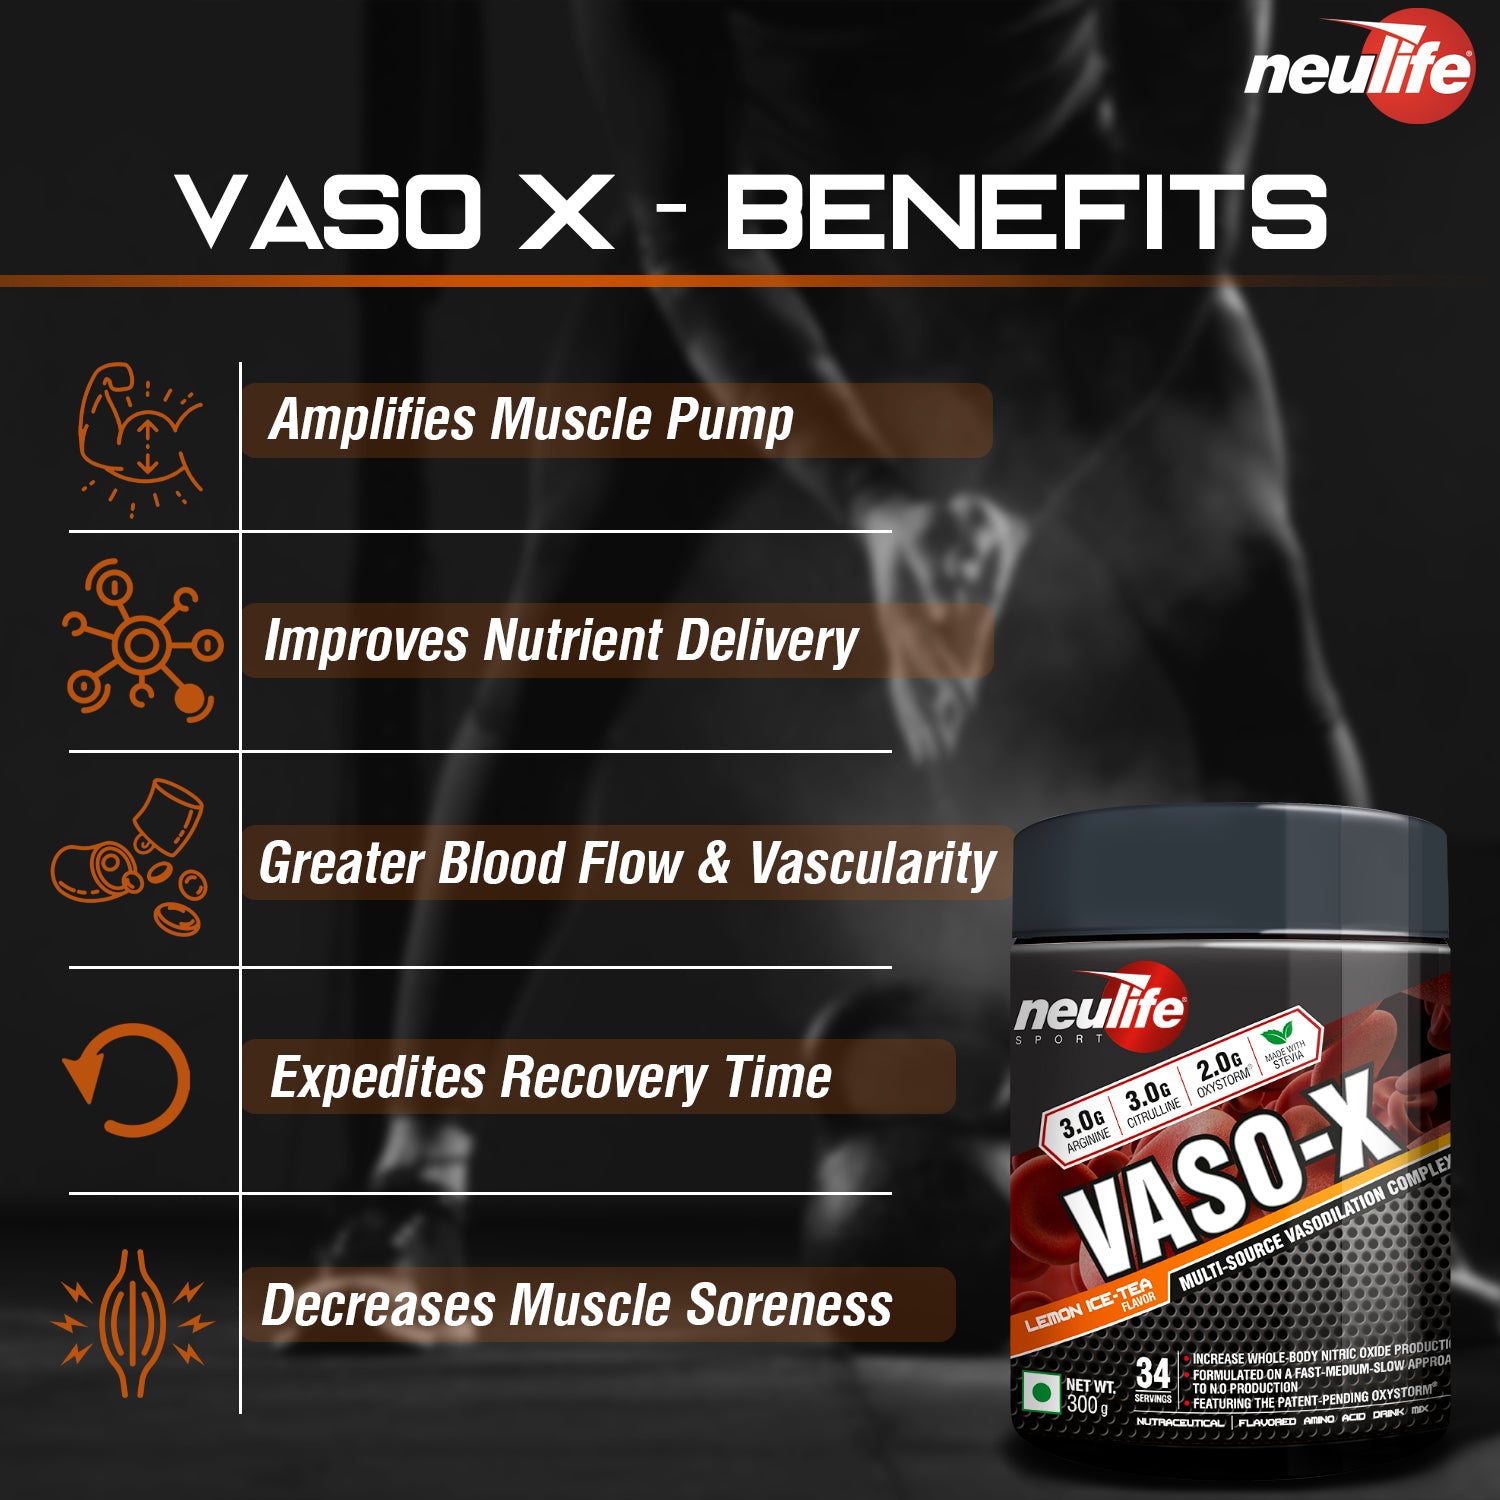 Vaso-X Time Release Nitric Oxide Booster for Muscle Pumps